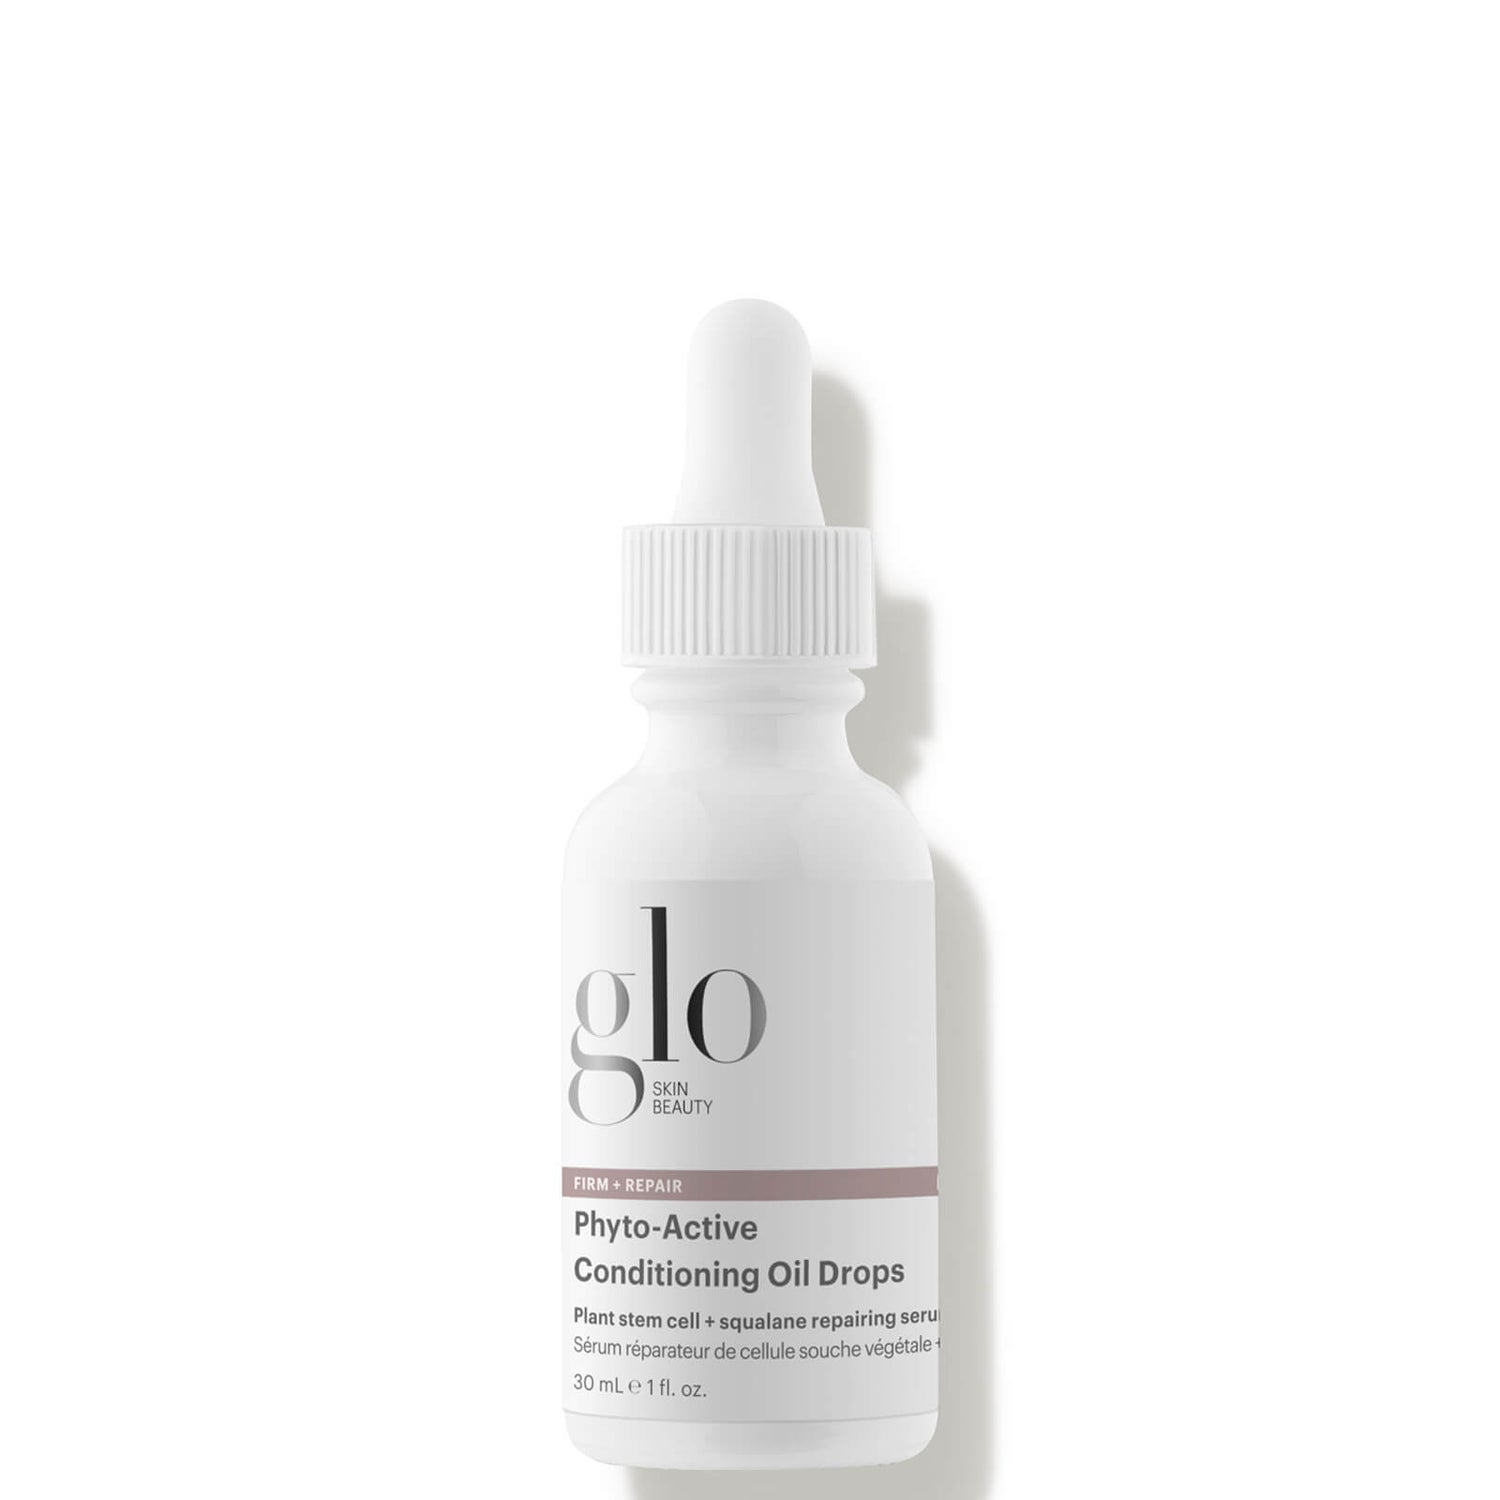 Oil Drops Phyto-Active Conditioning Glo Skin Beauty 30ml